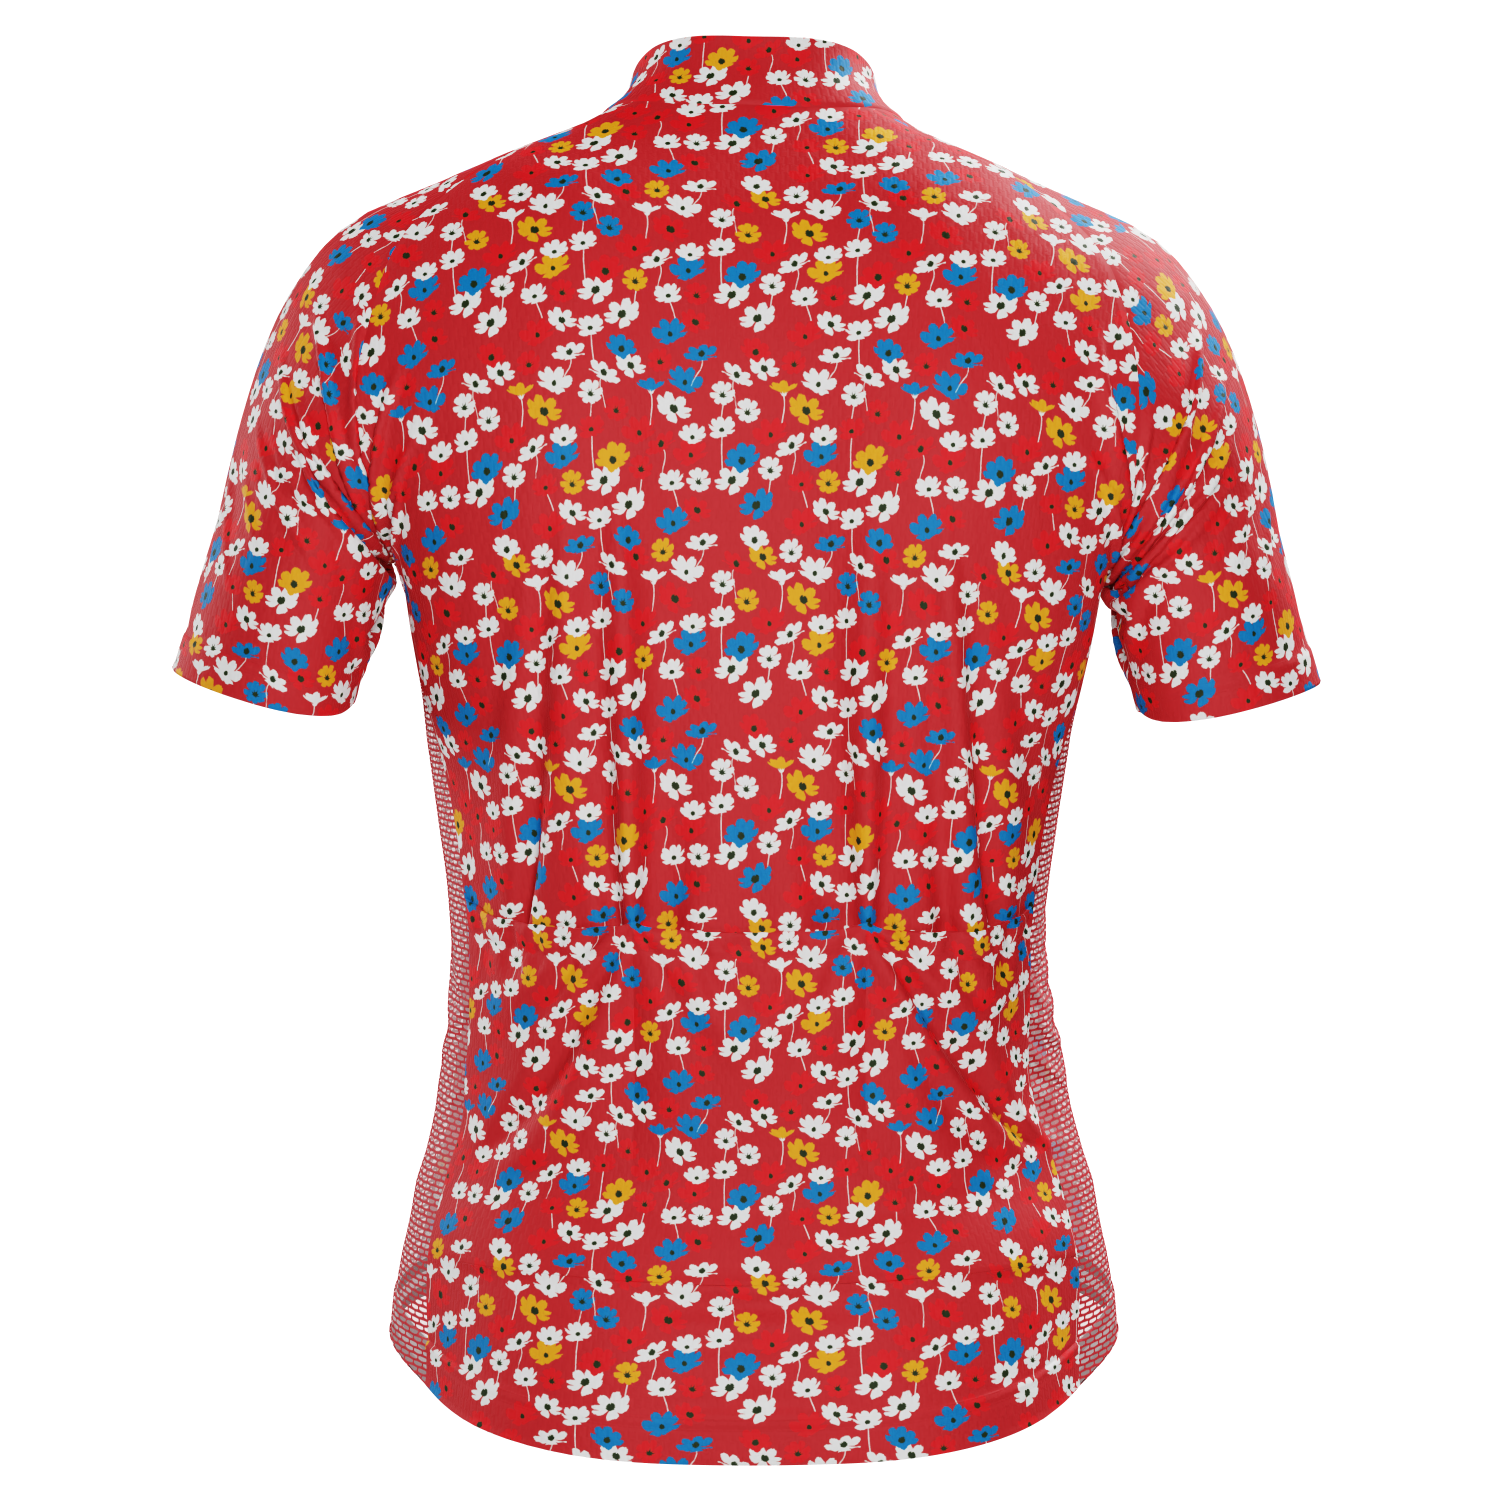 Women's Ditsy Floral Short Sleeve Cycling Jersey